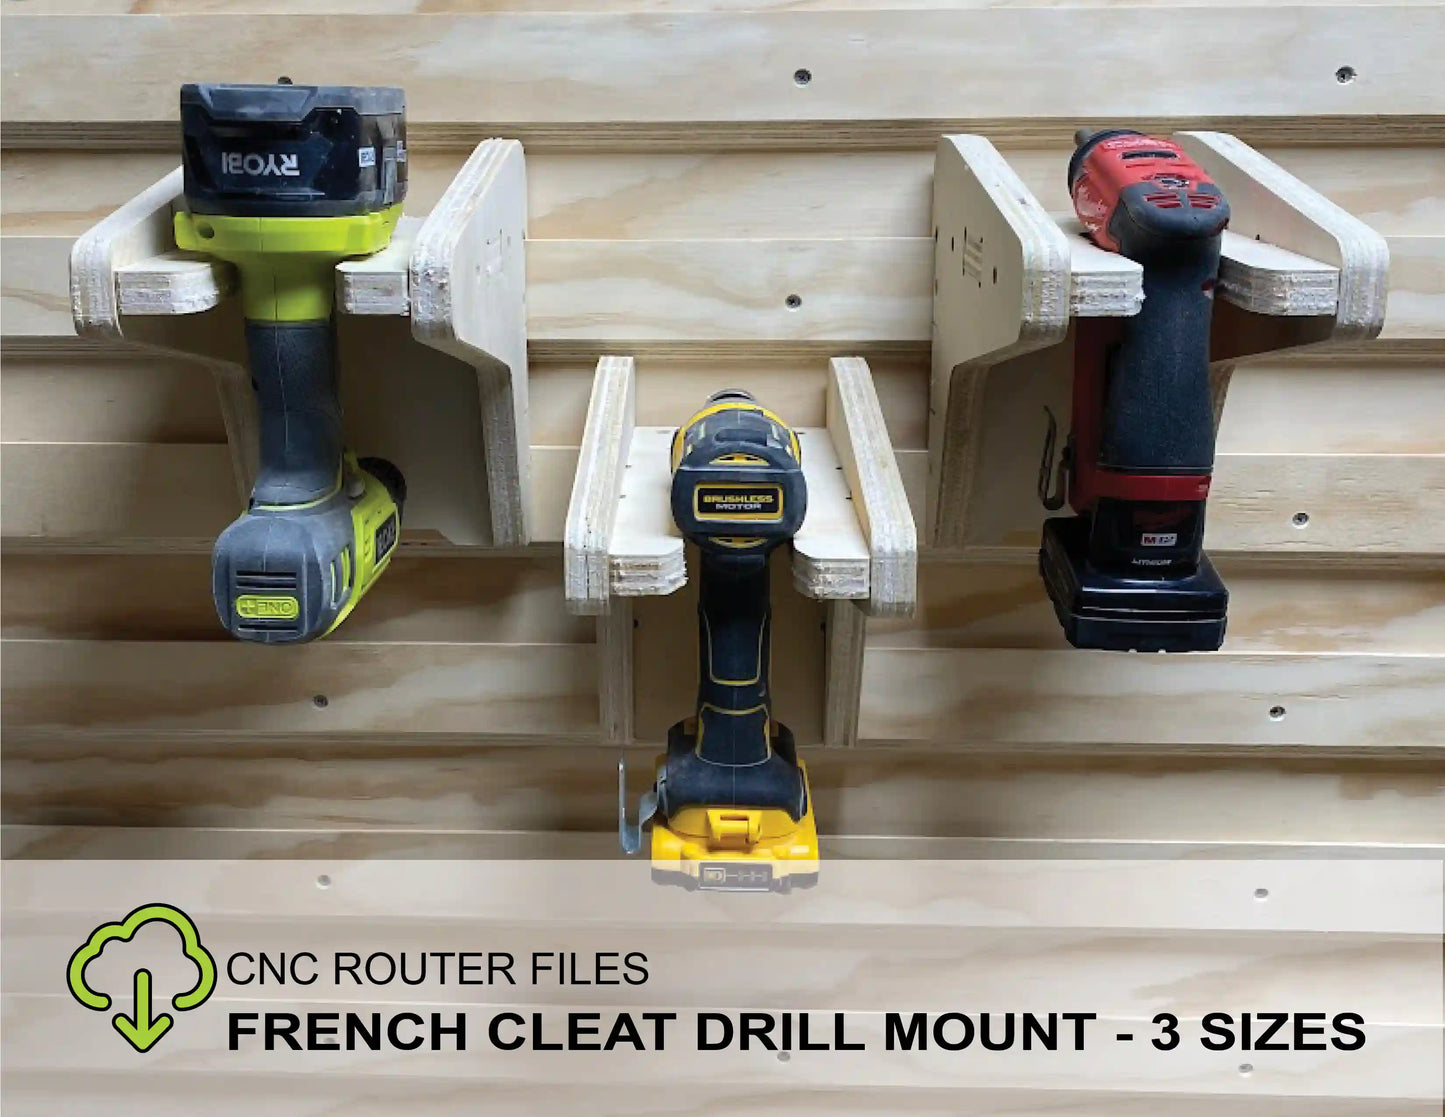 CNC Router Files French Cleat Cordless Drill Mount